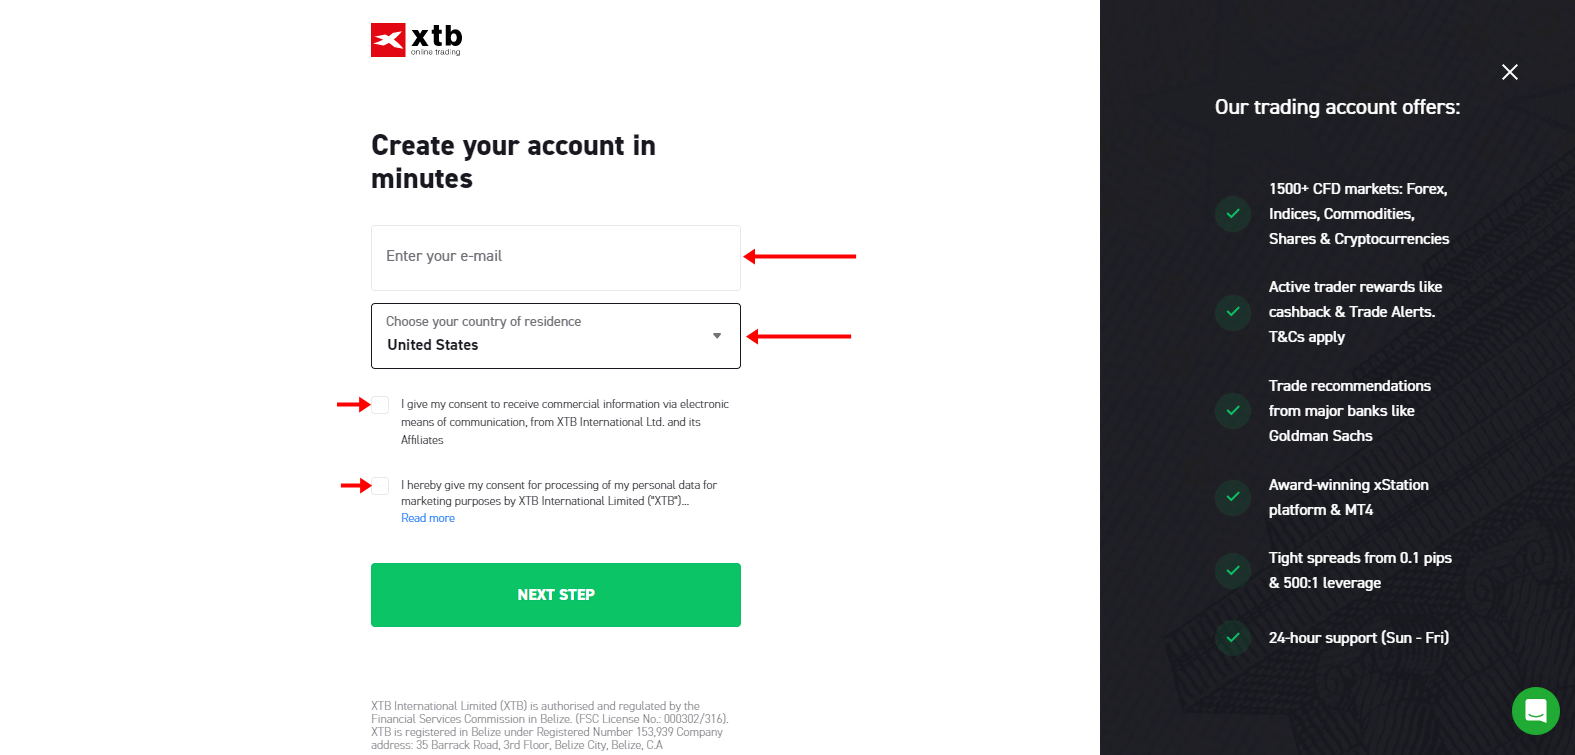 6 steps on how to sign up for a new trading account